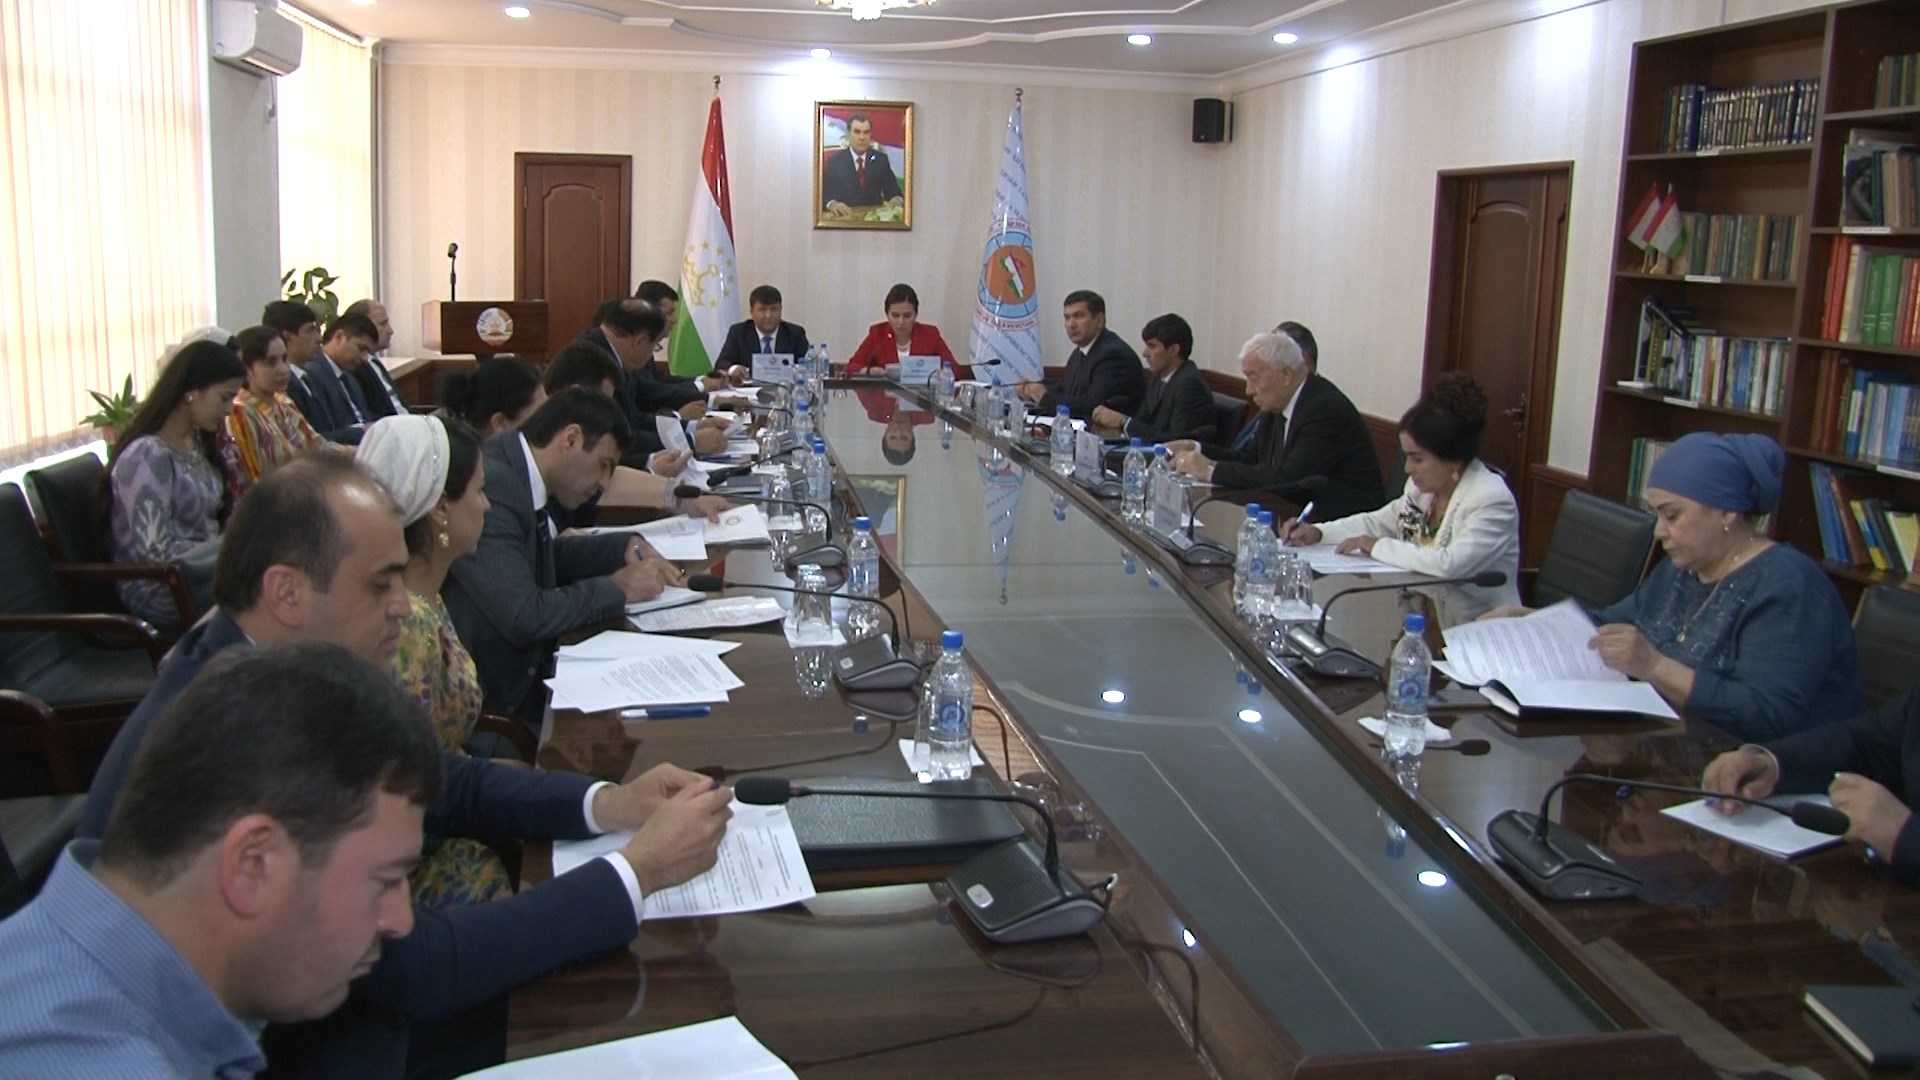 Meeting of the Executive Committee of the People's Democratic Party of Tajikistan in Shohmansur district